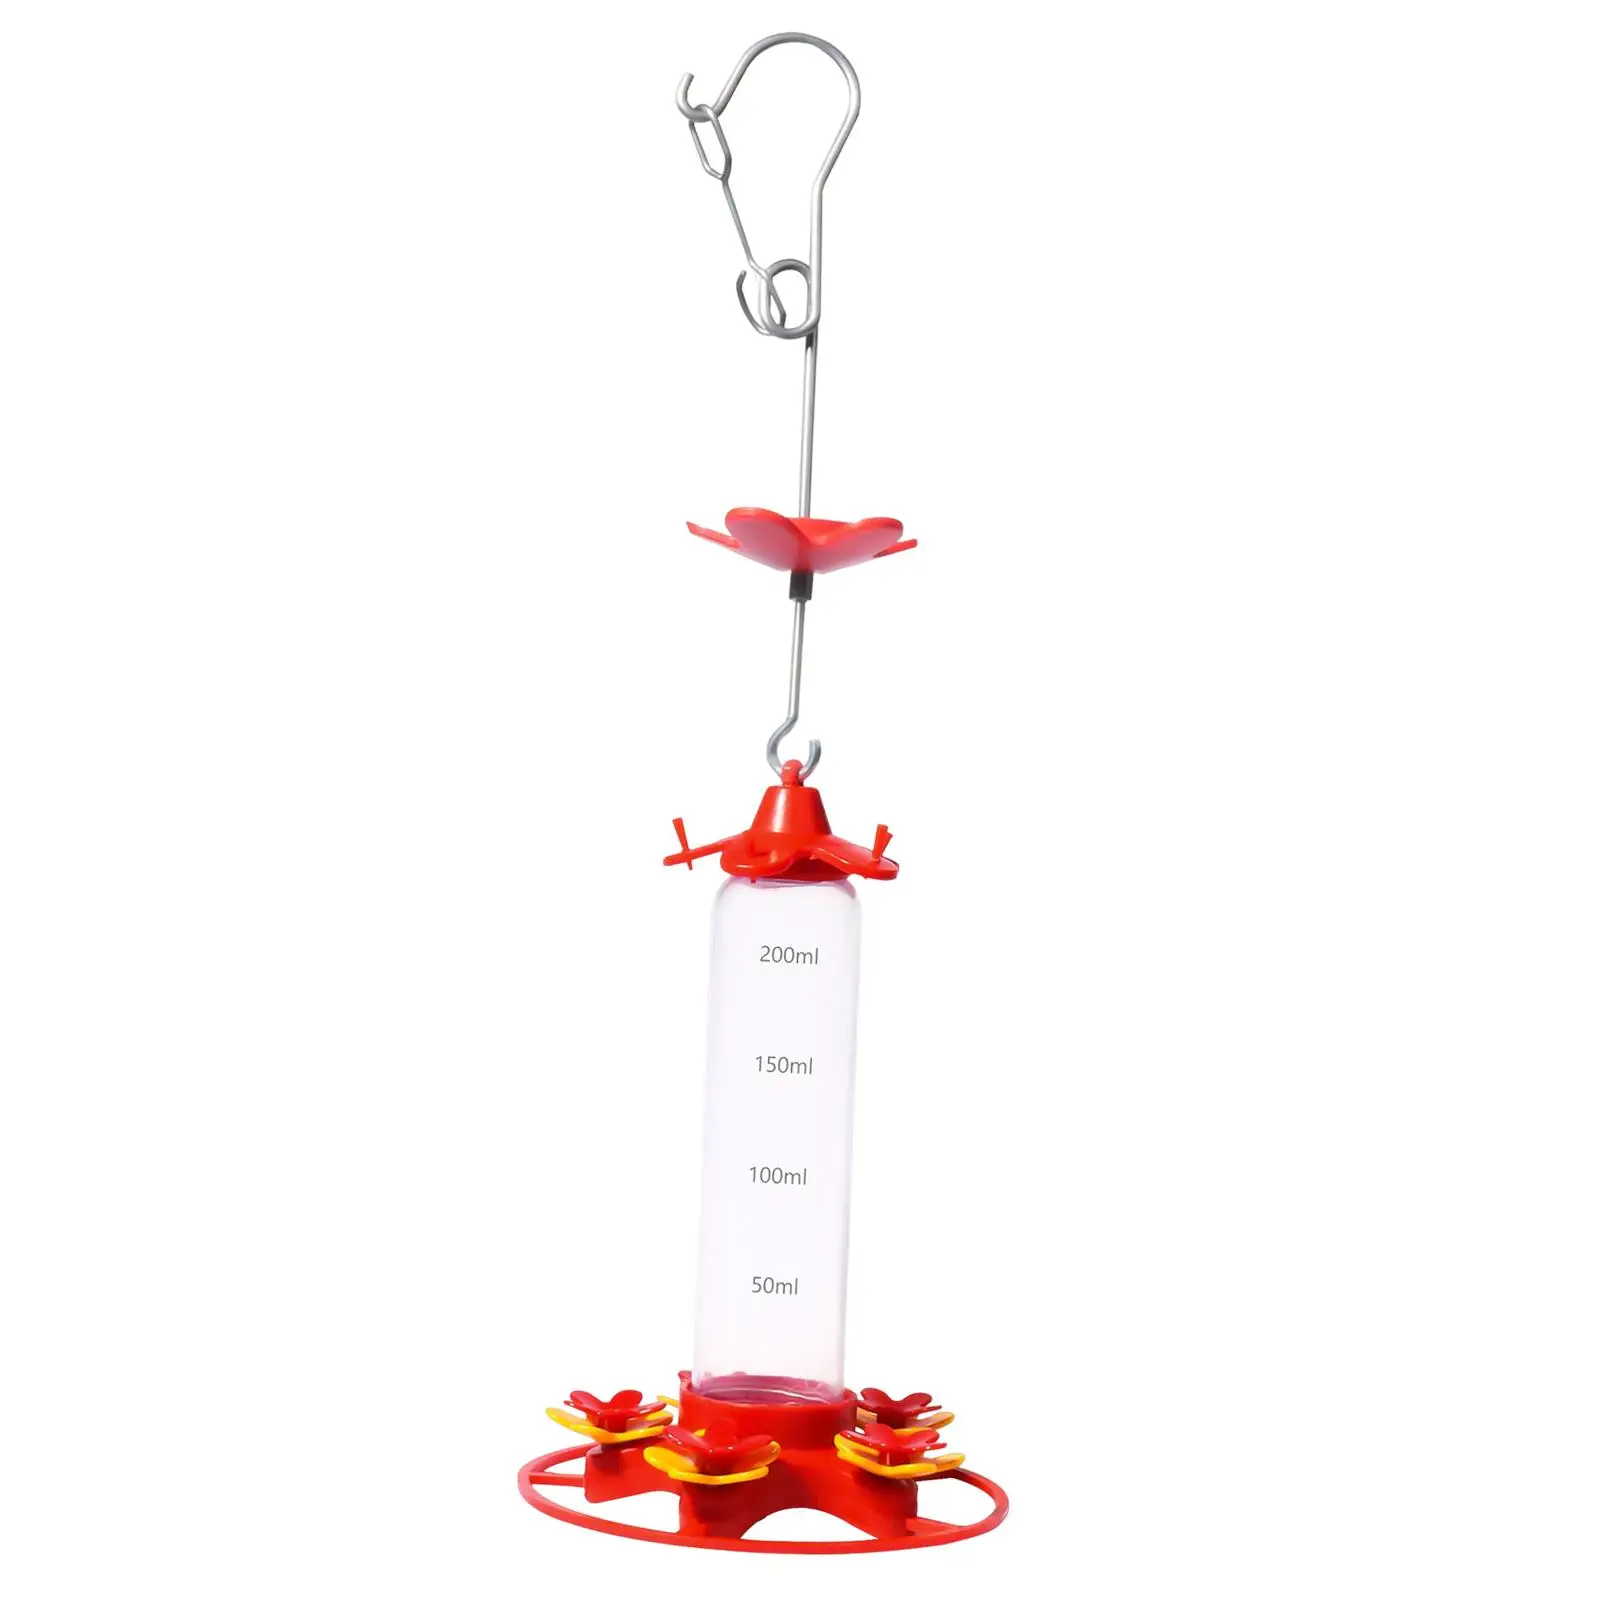 Hummingbird Feeder, Hanging Water Feeder with Hook, 10 Ounces Easy to Clean,